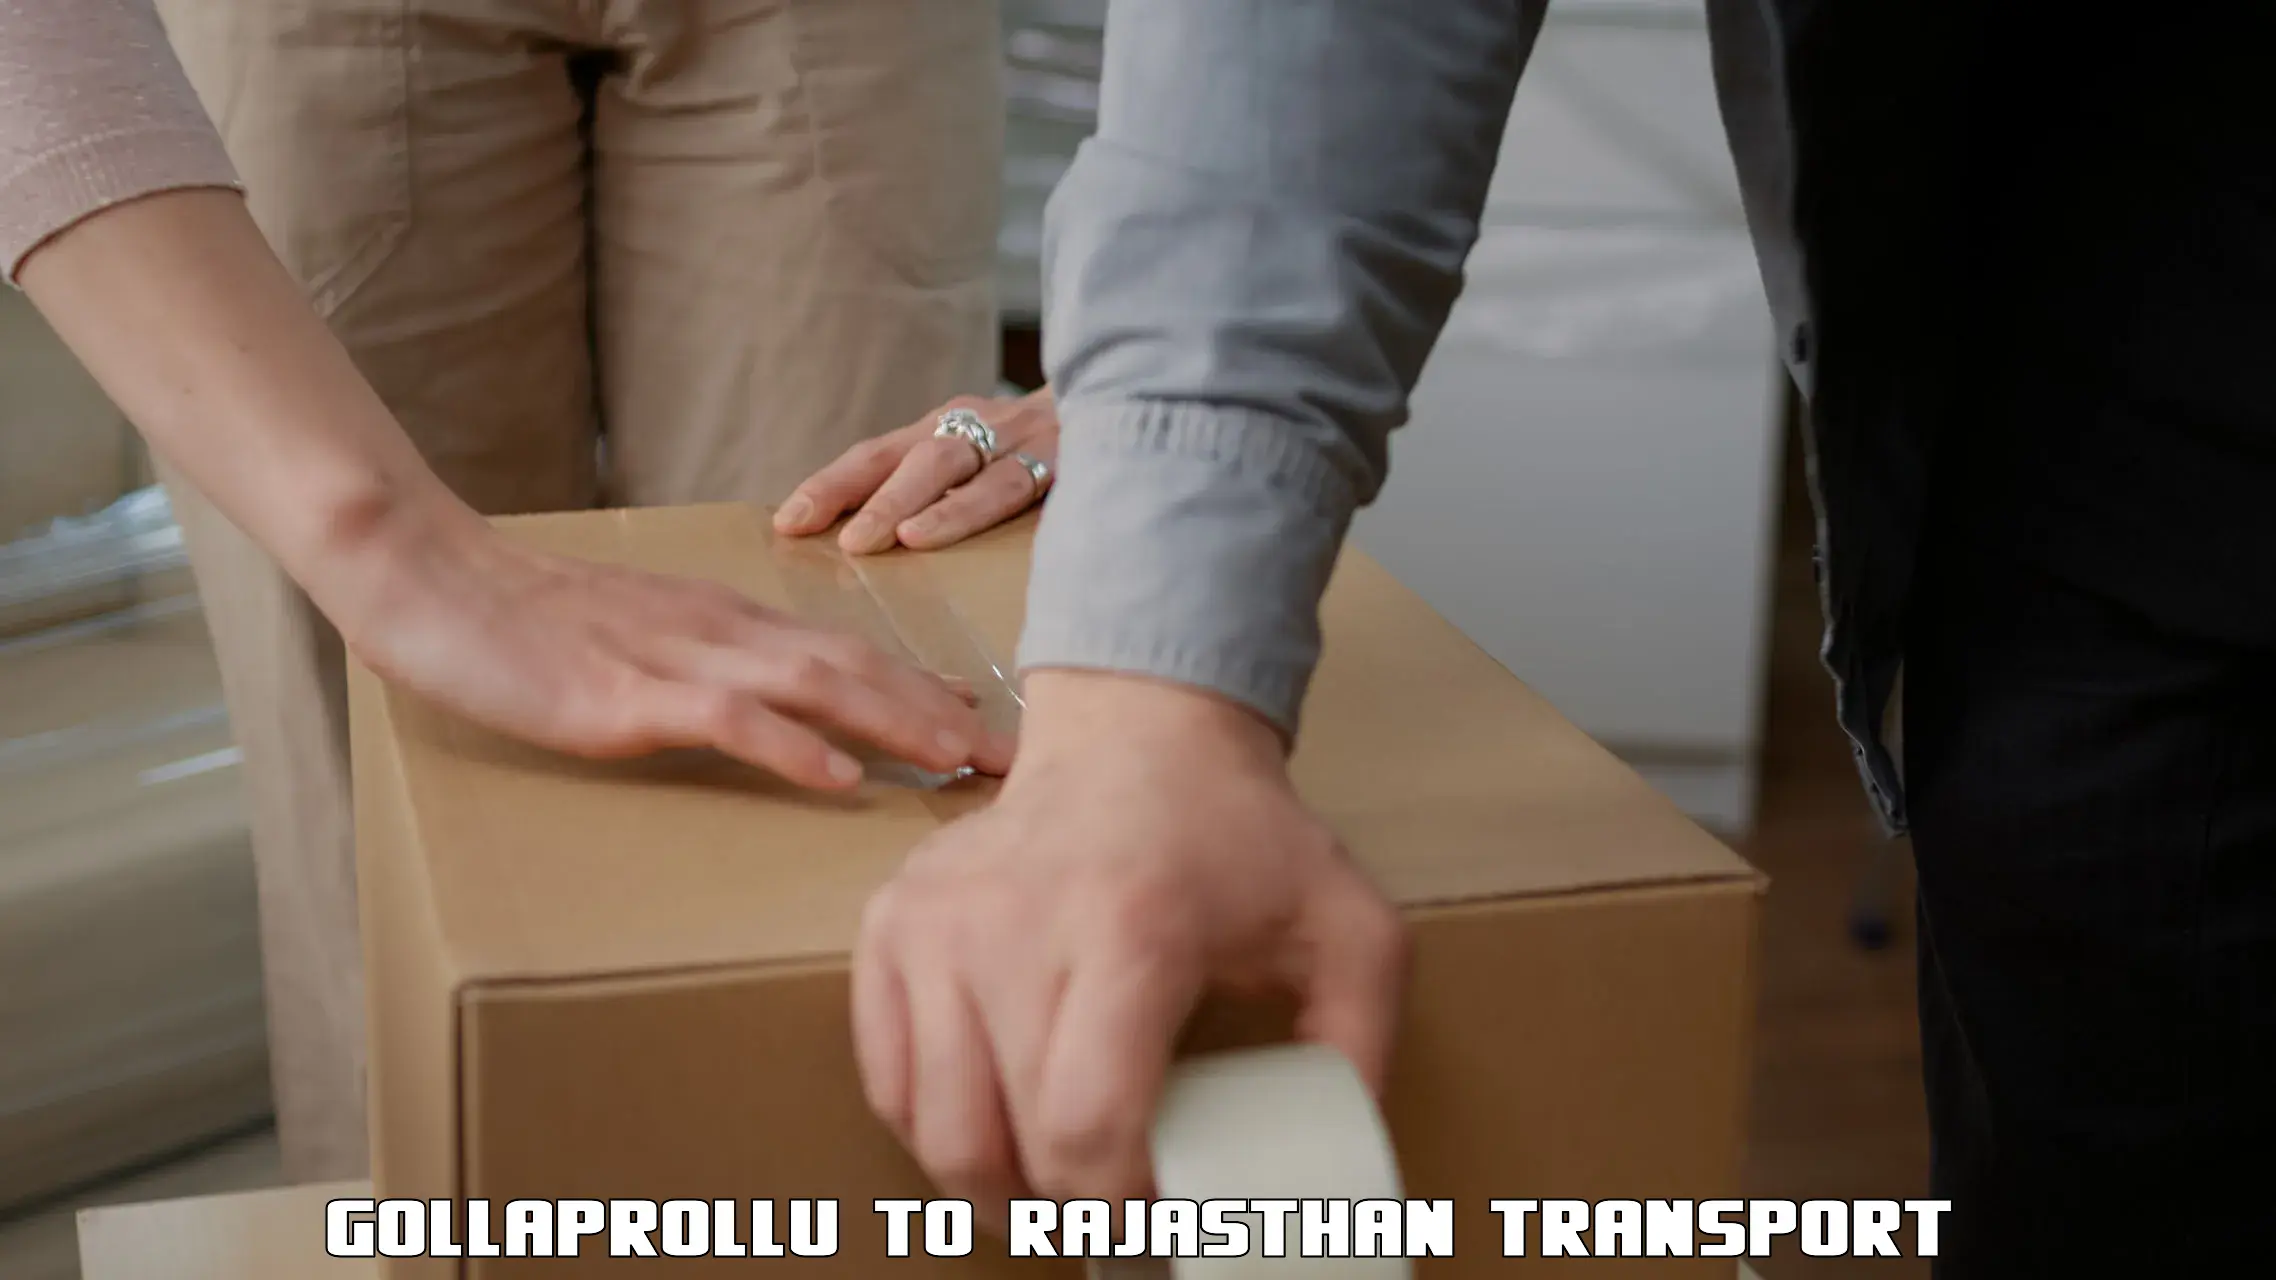 Air freight transport services Gollaprollu to Dholpur